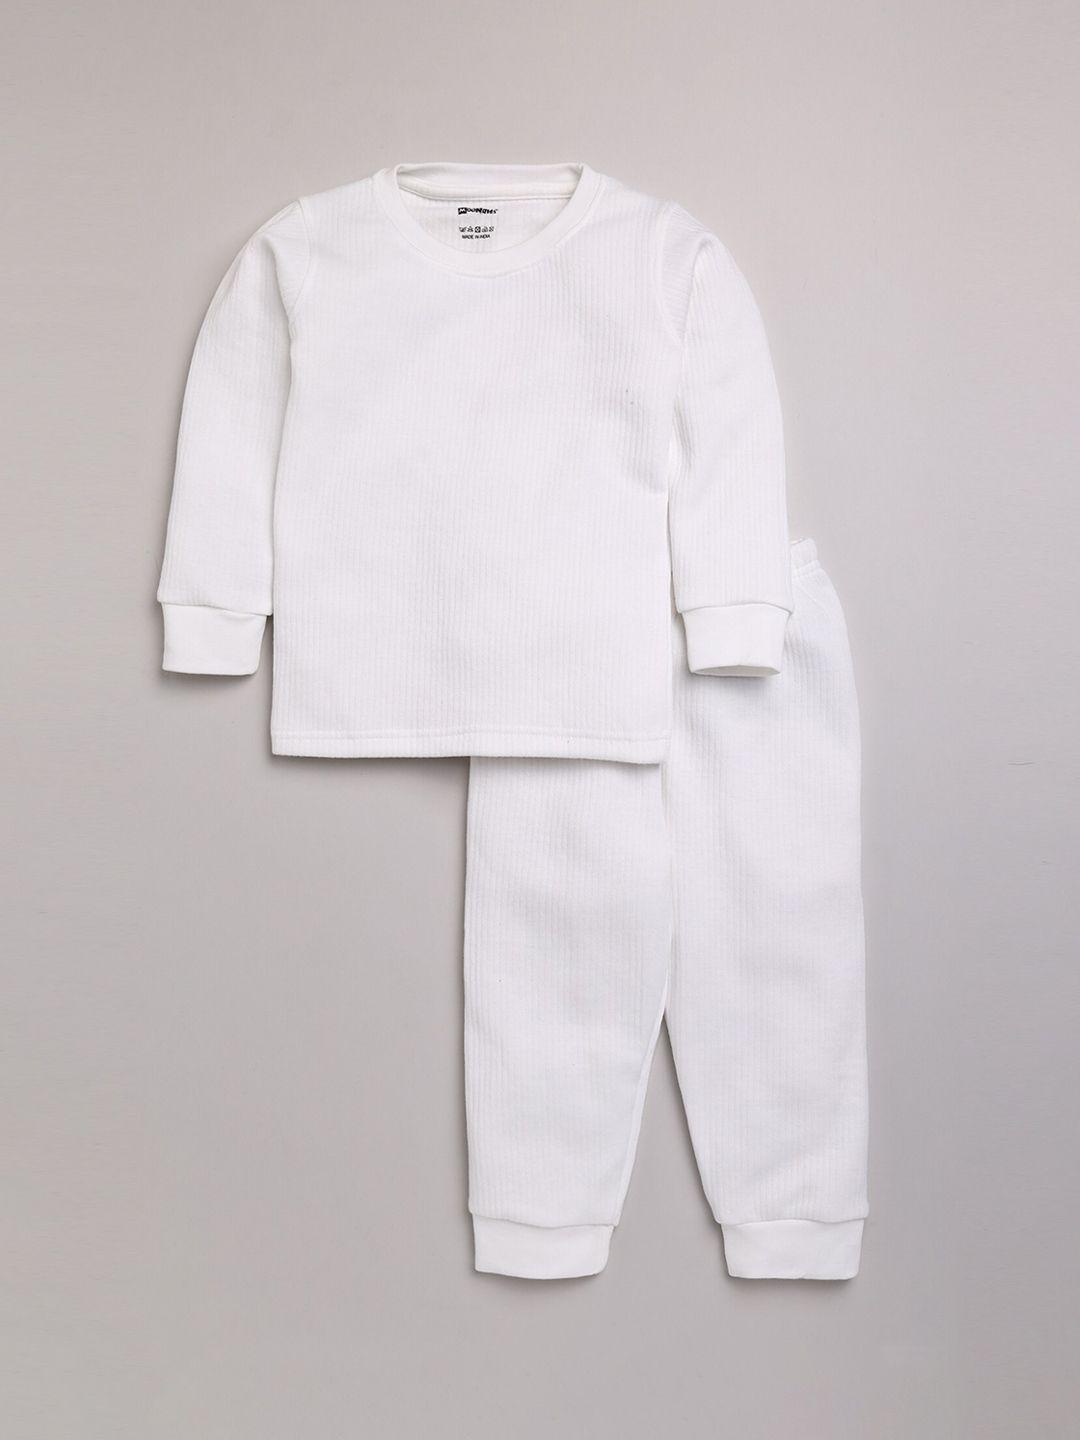 moonkids infant boys white solid thermal set